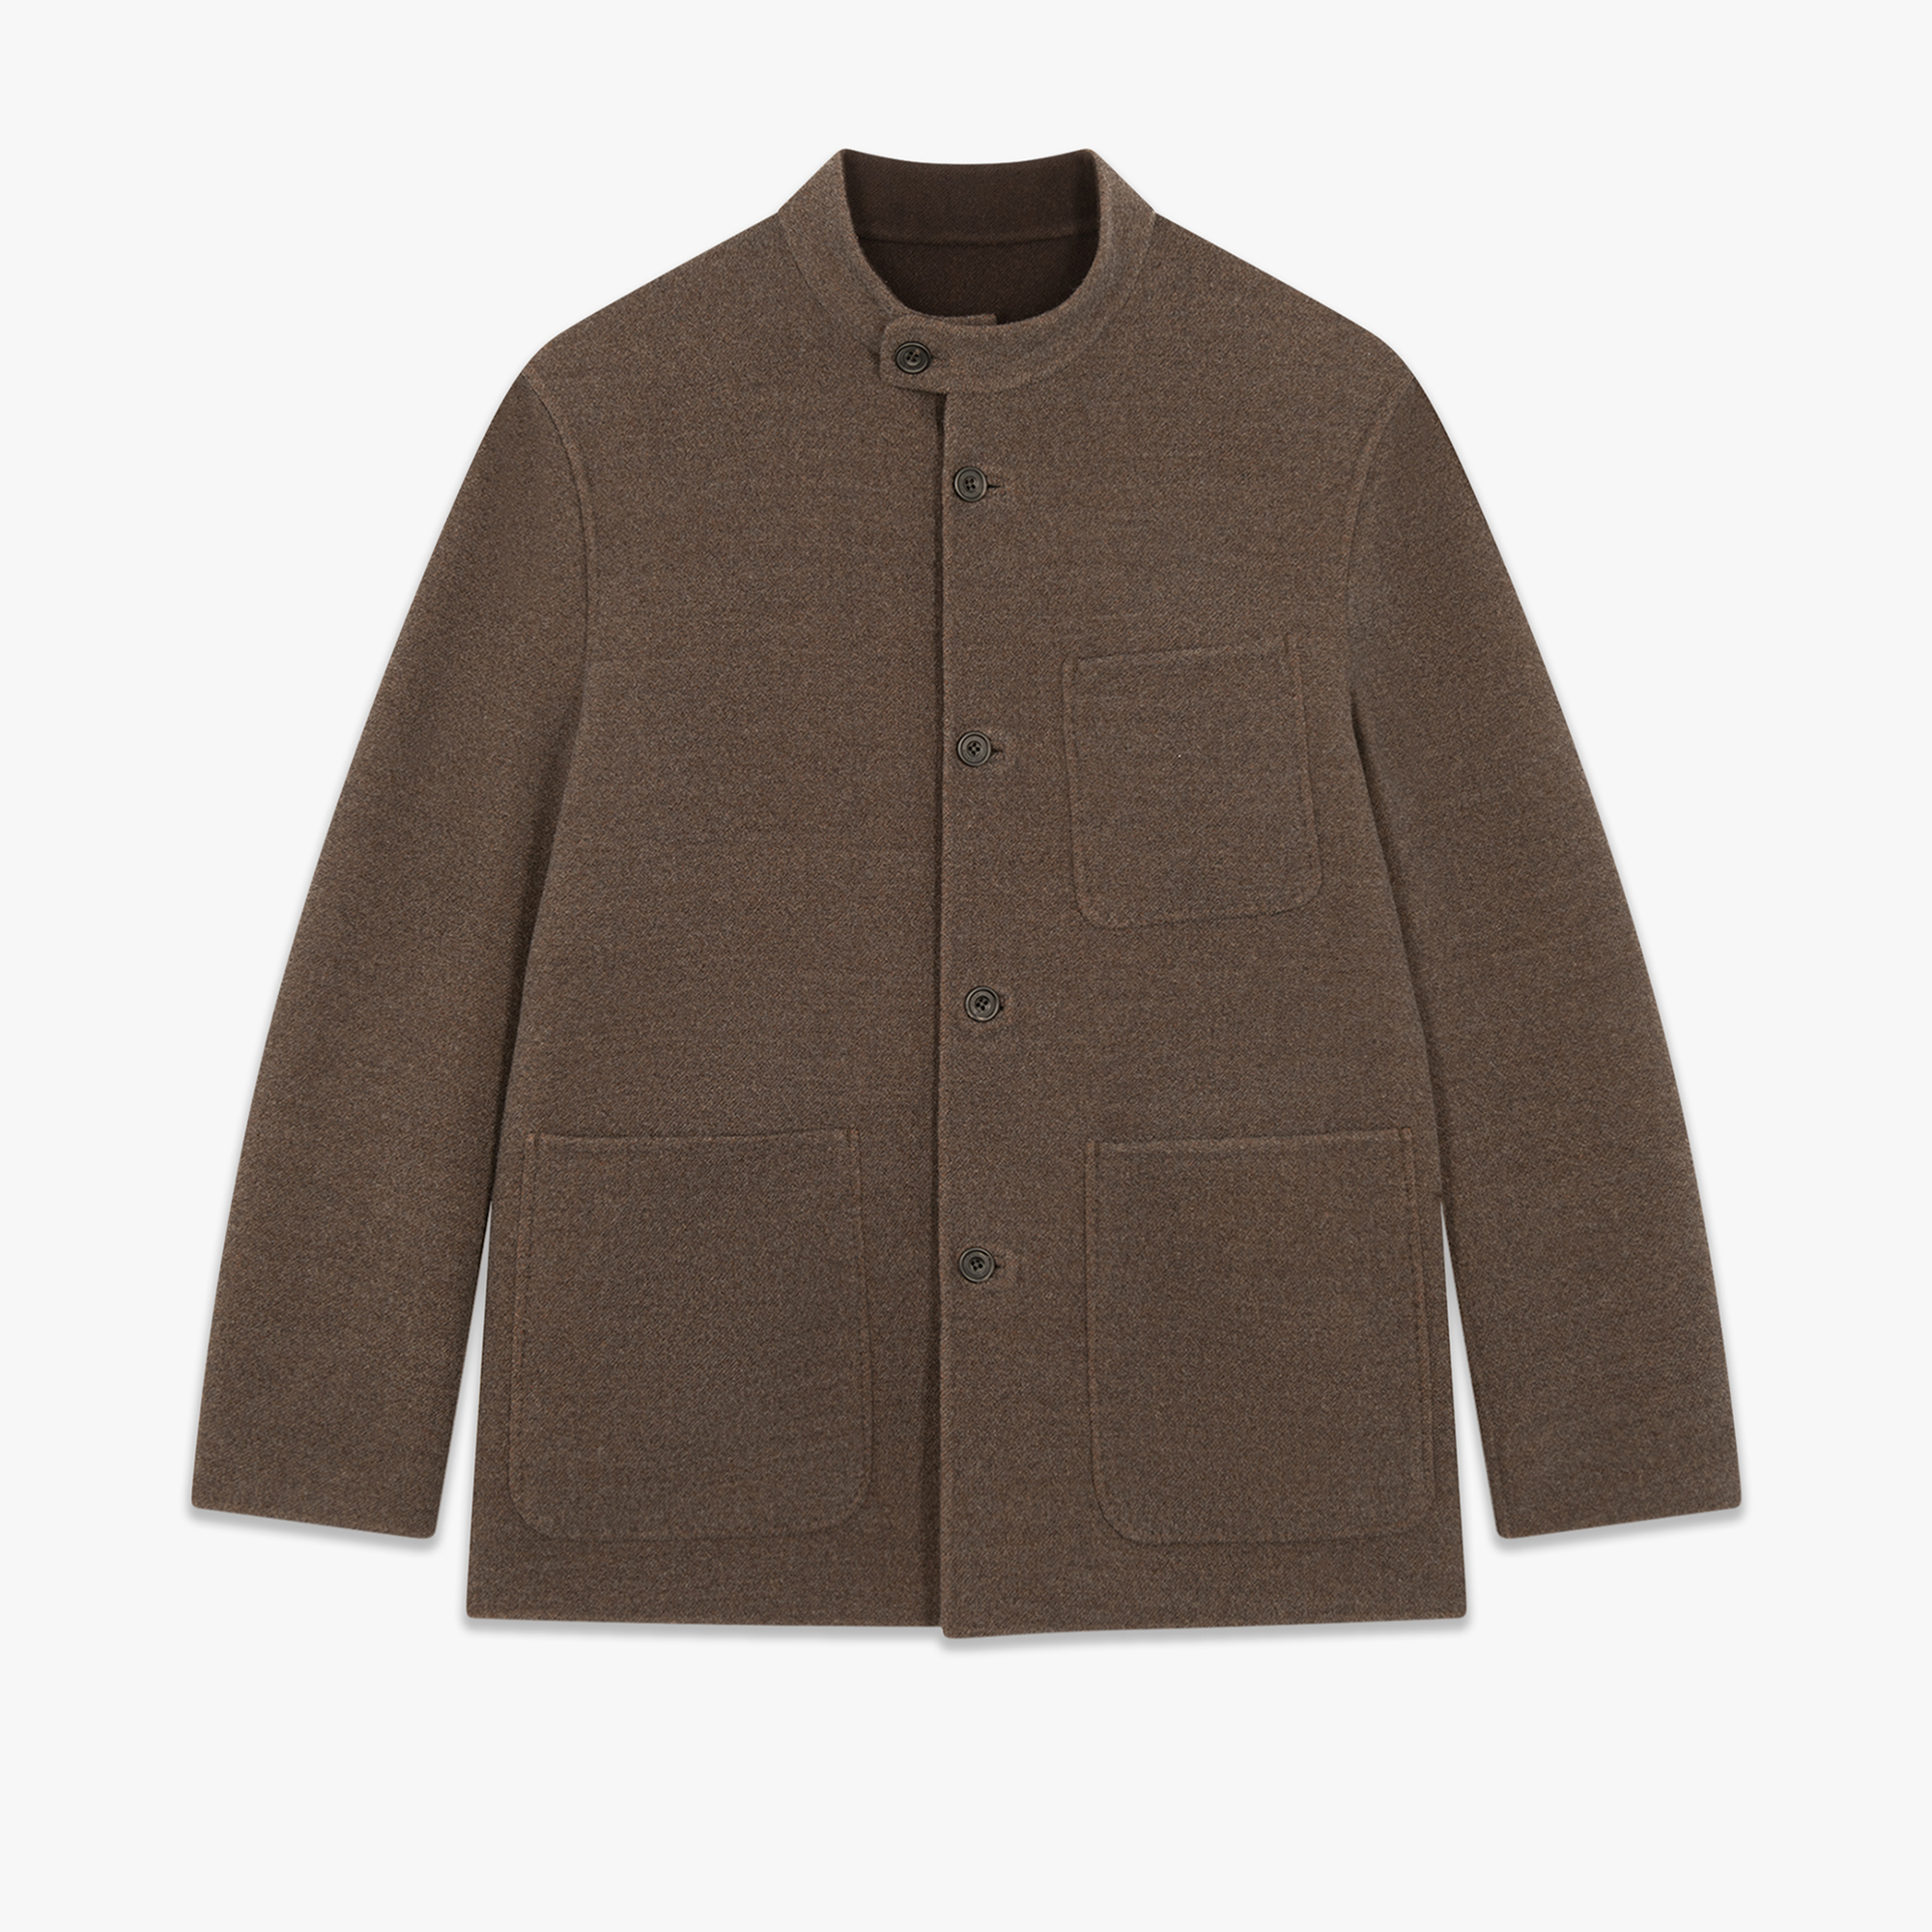 Double Face Wool Field Jacket, NUANCE OF BROWN, hi-res